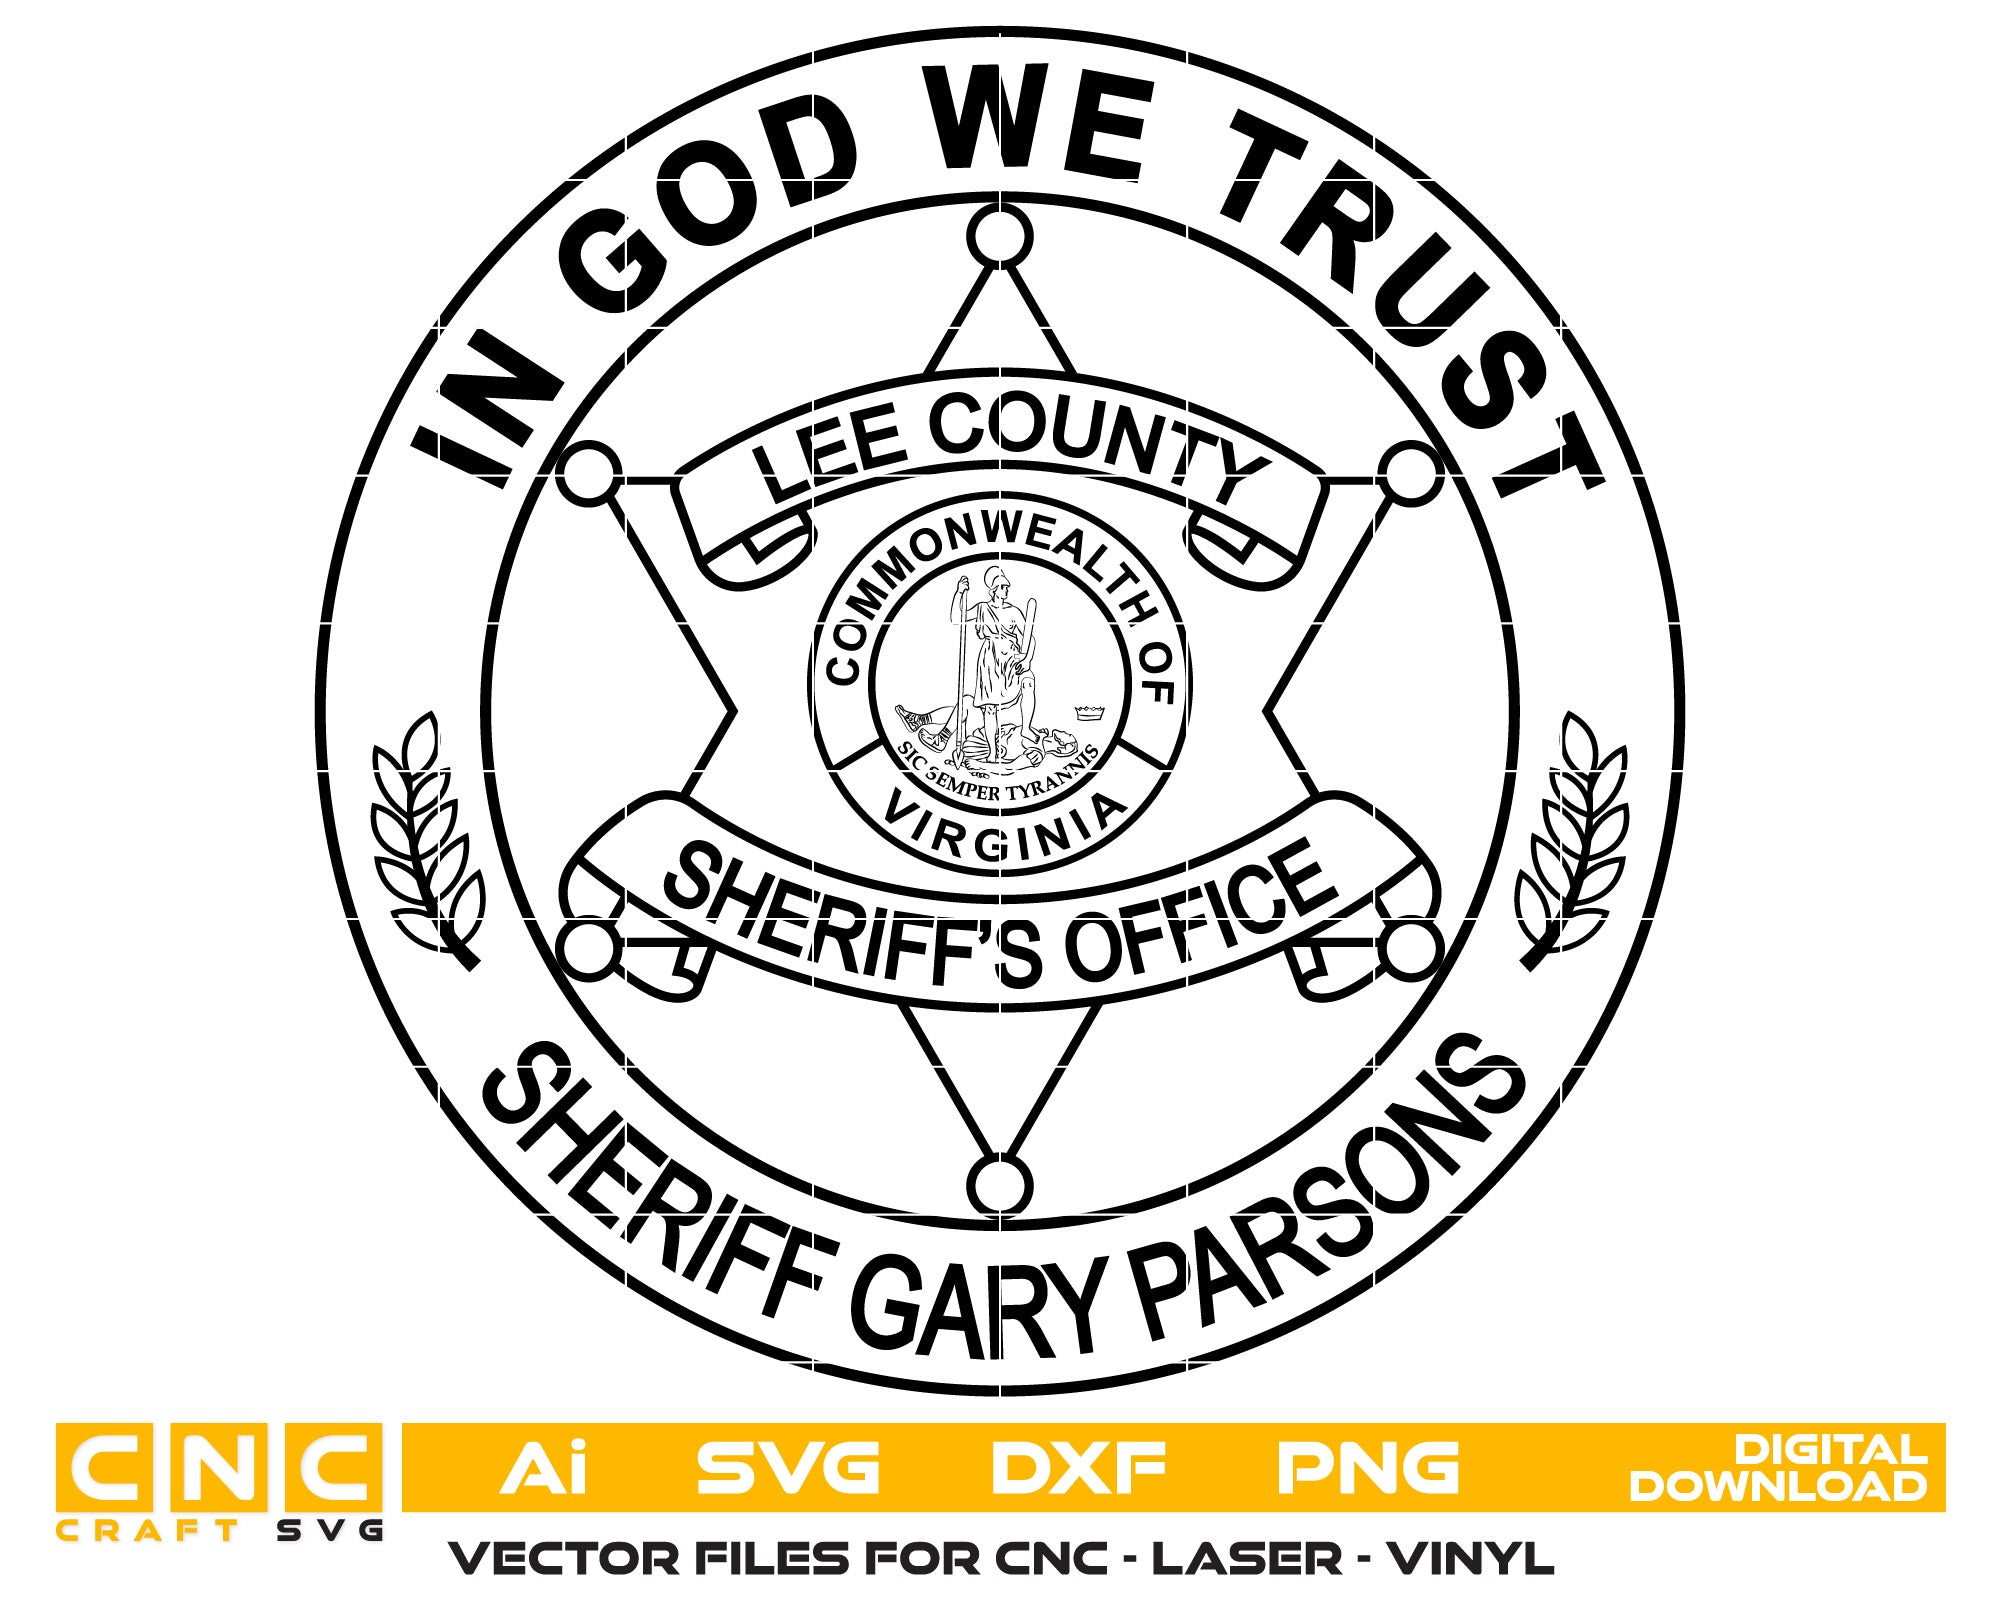 Commonwealth of Virginia Lee County Sheriff Gary Person Badge Vector Art, Ai,SVG, DXF, PNG, Digital Files